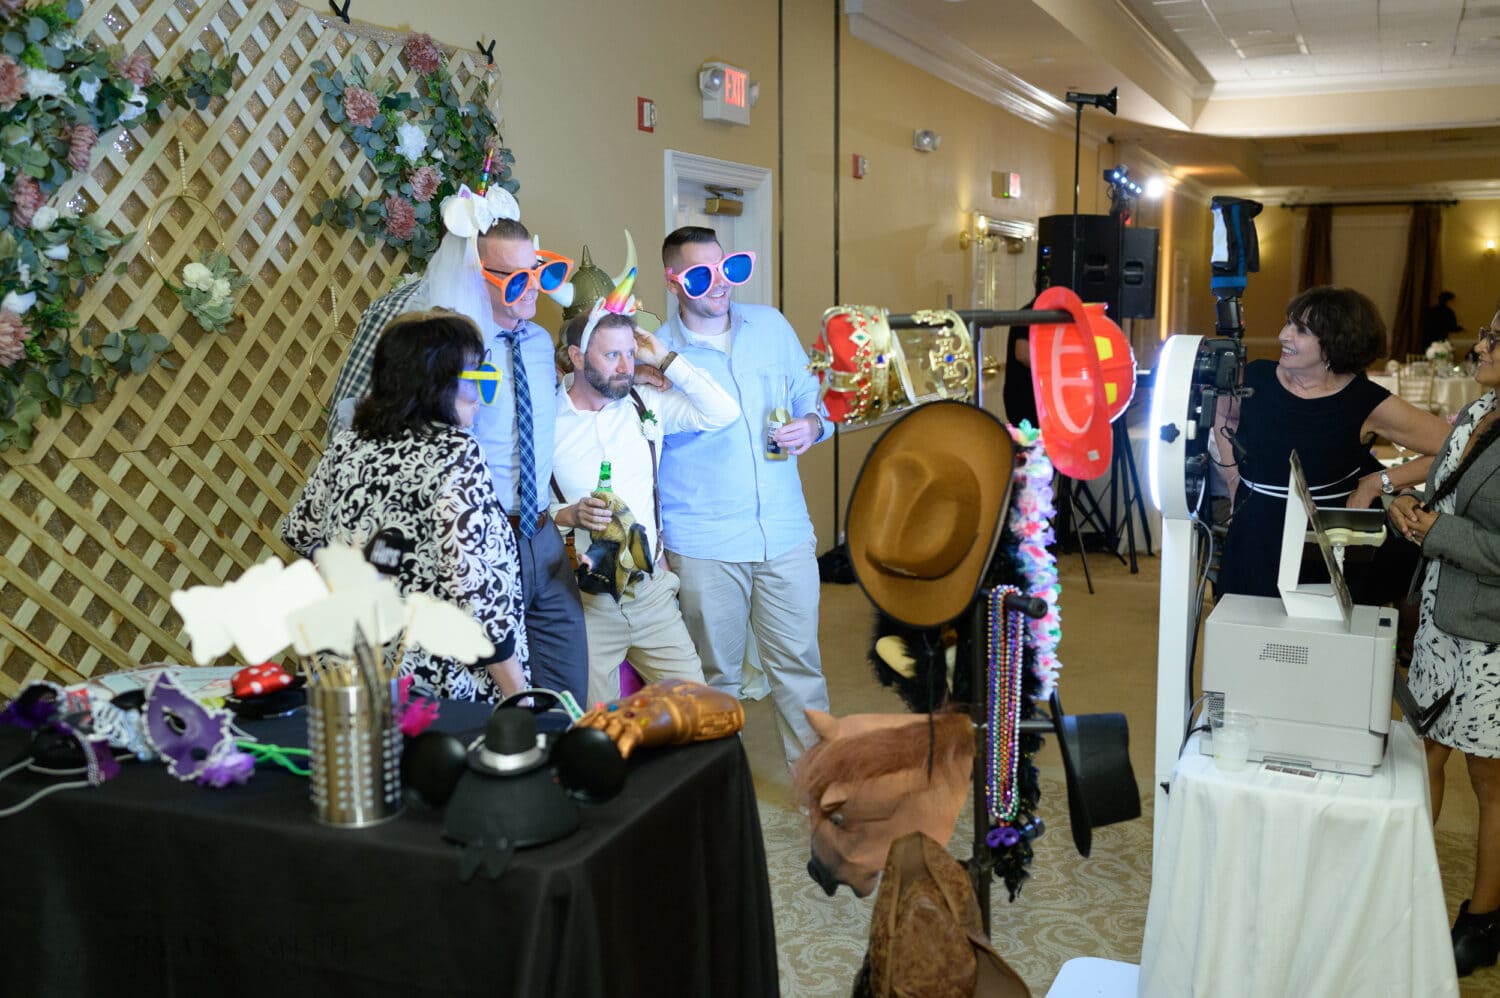 Fun photo booth pictures with a custom wooden lattice background - Pawleys Plantation Golf & Country Club